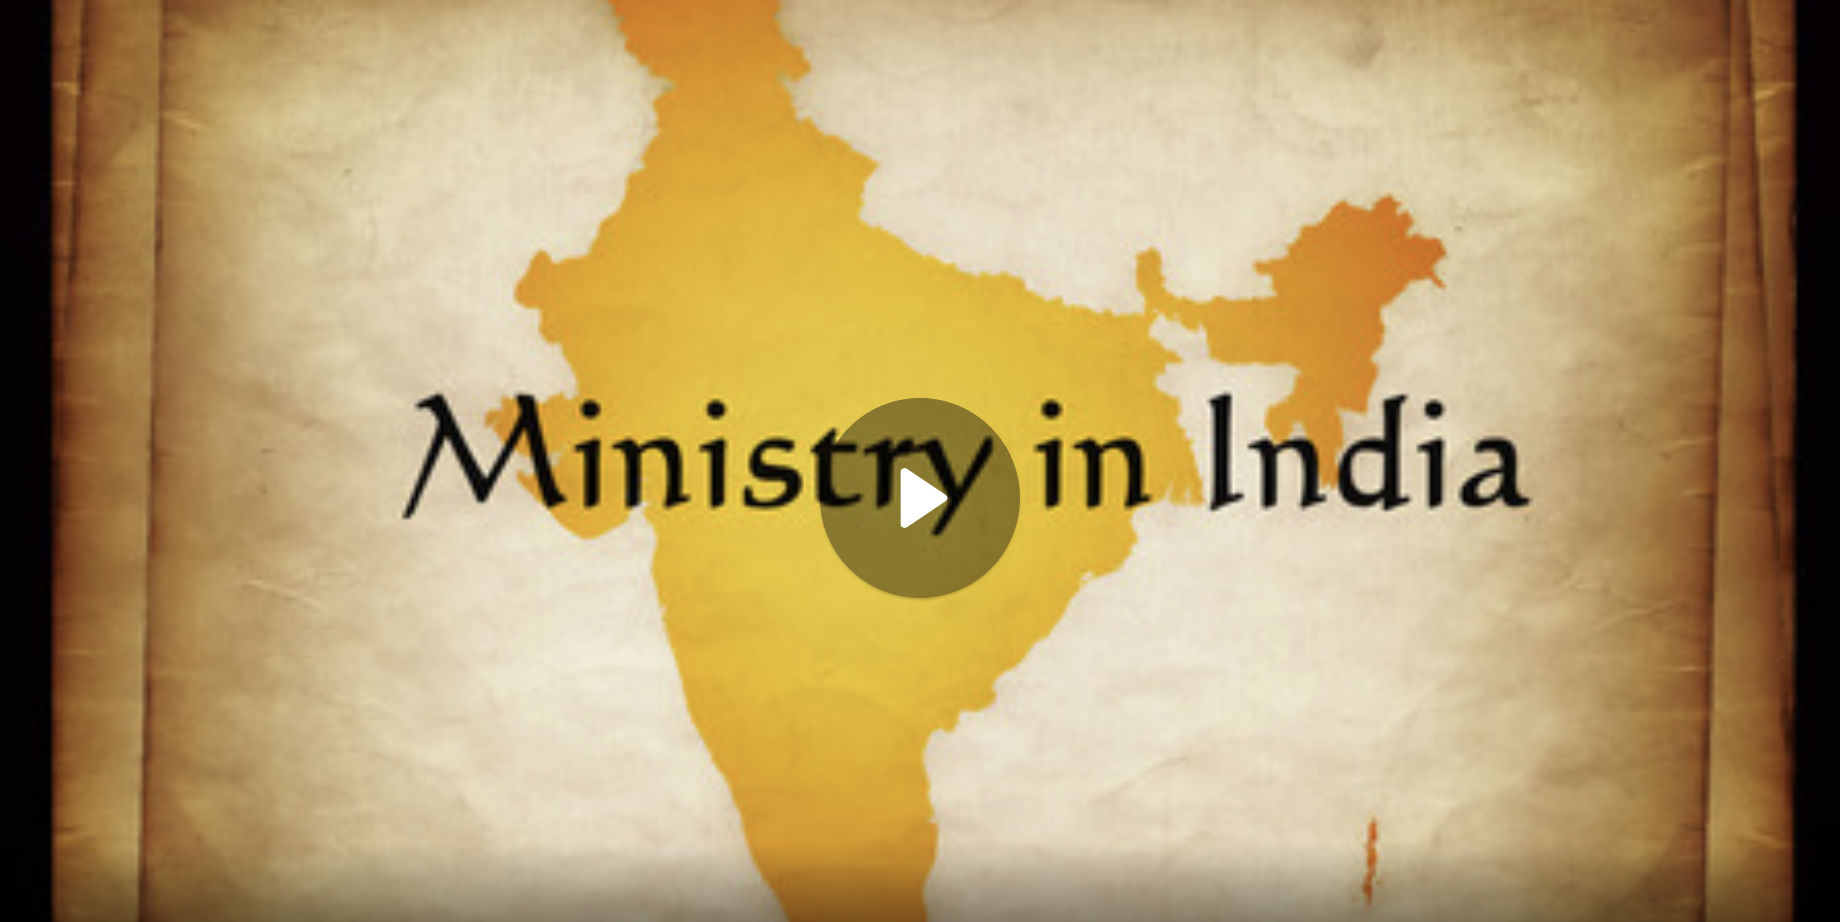 Ministry in India